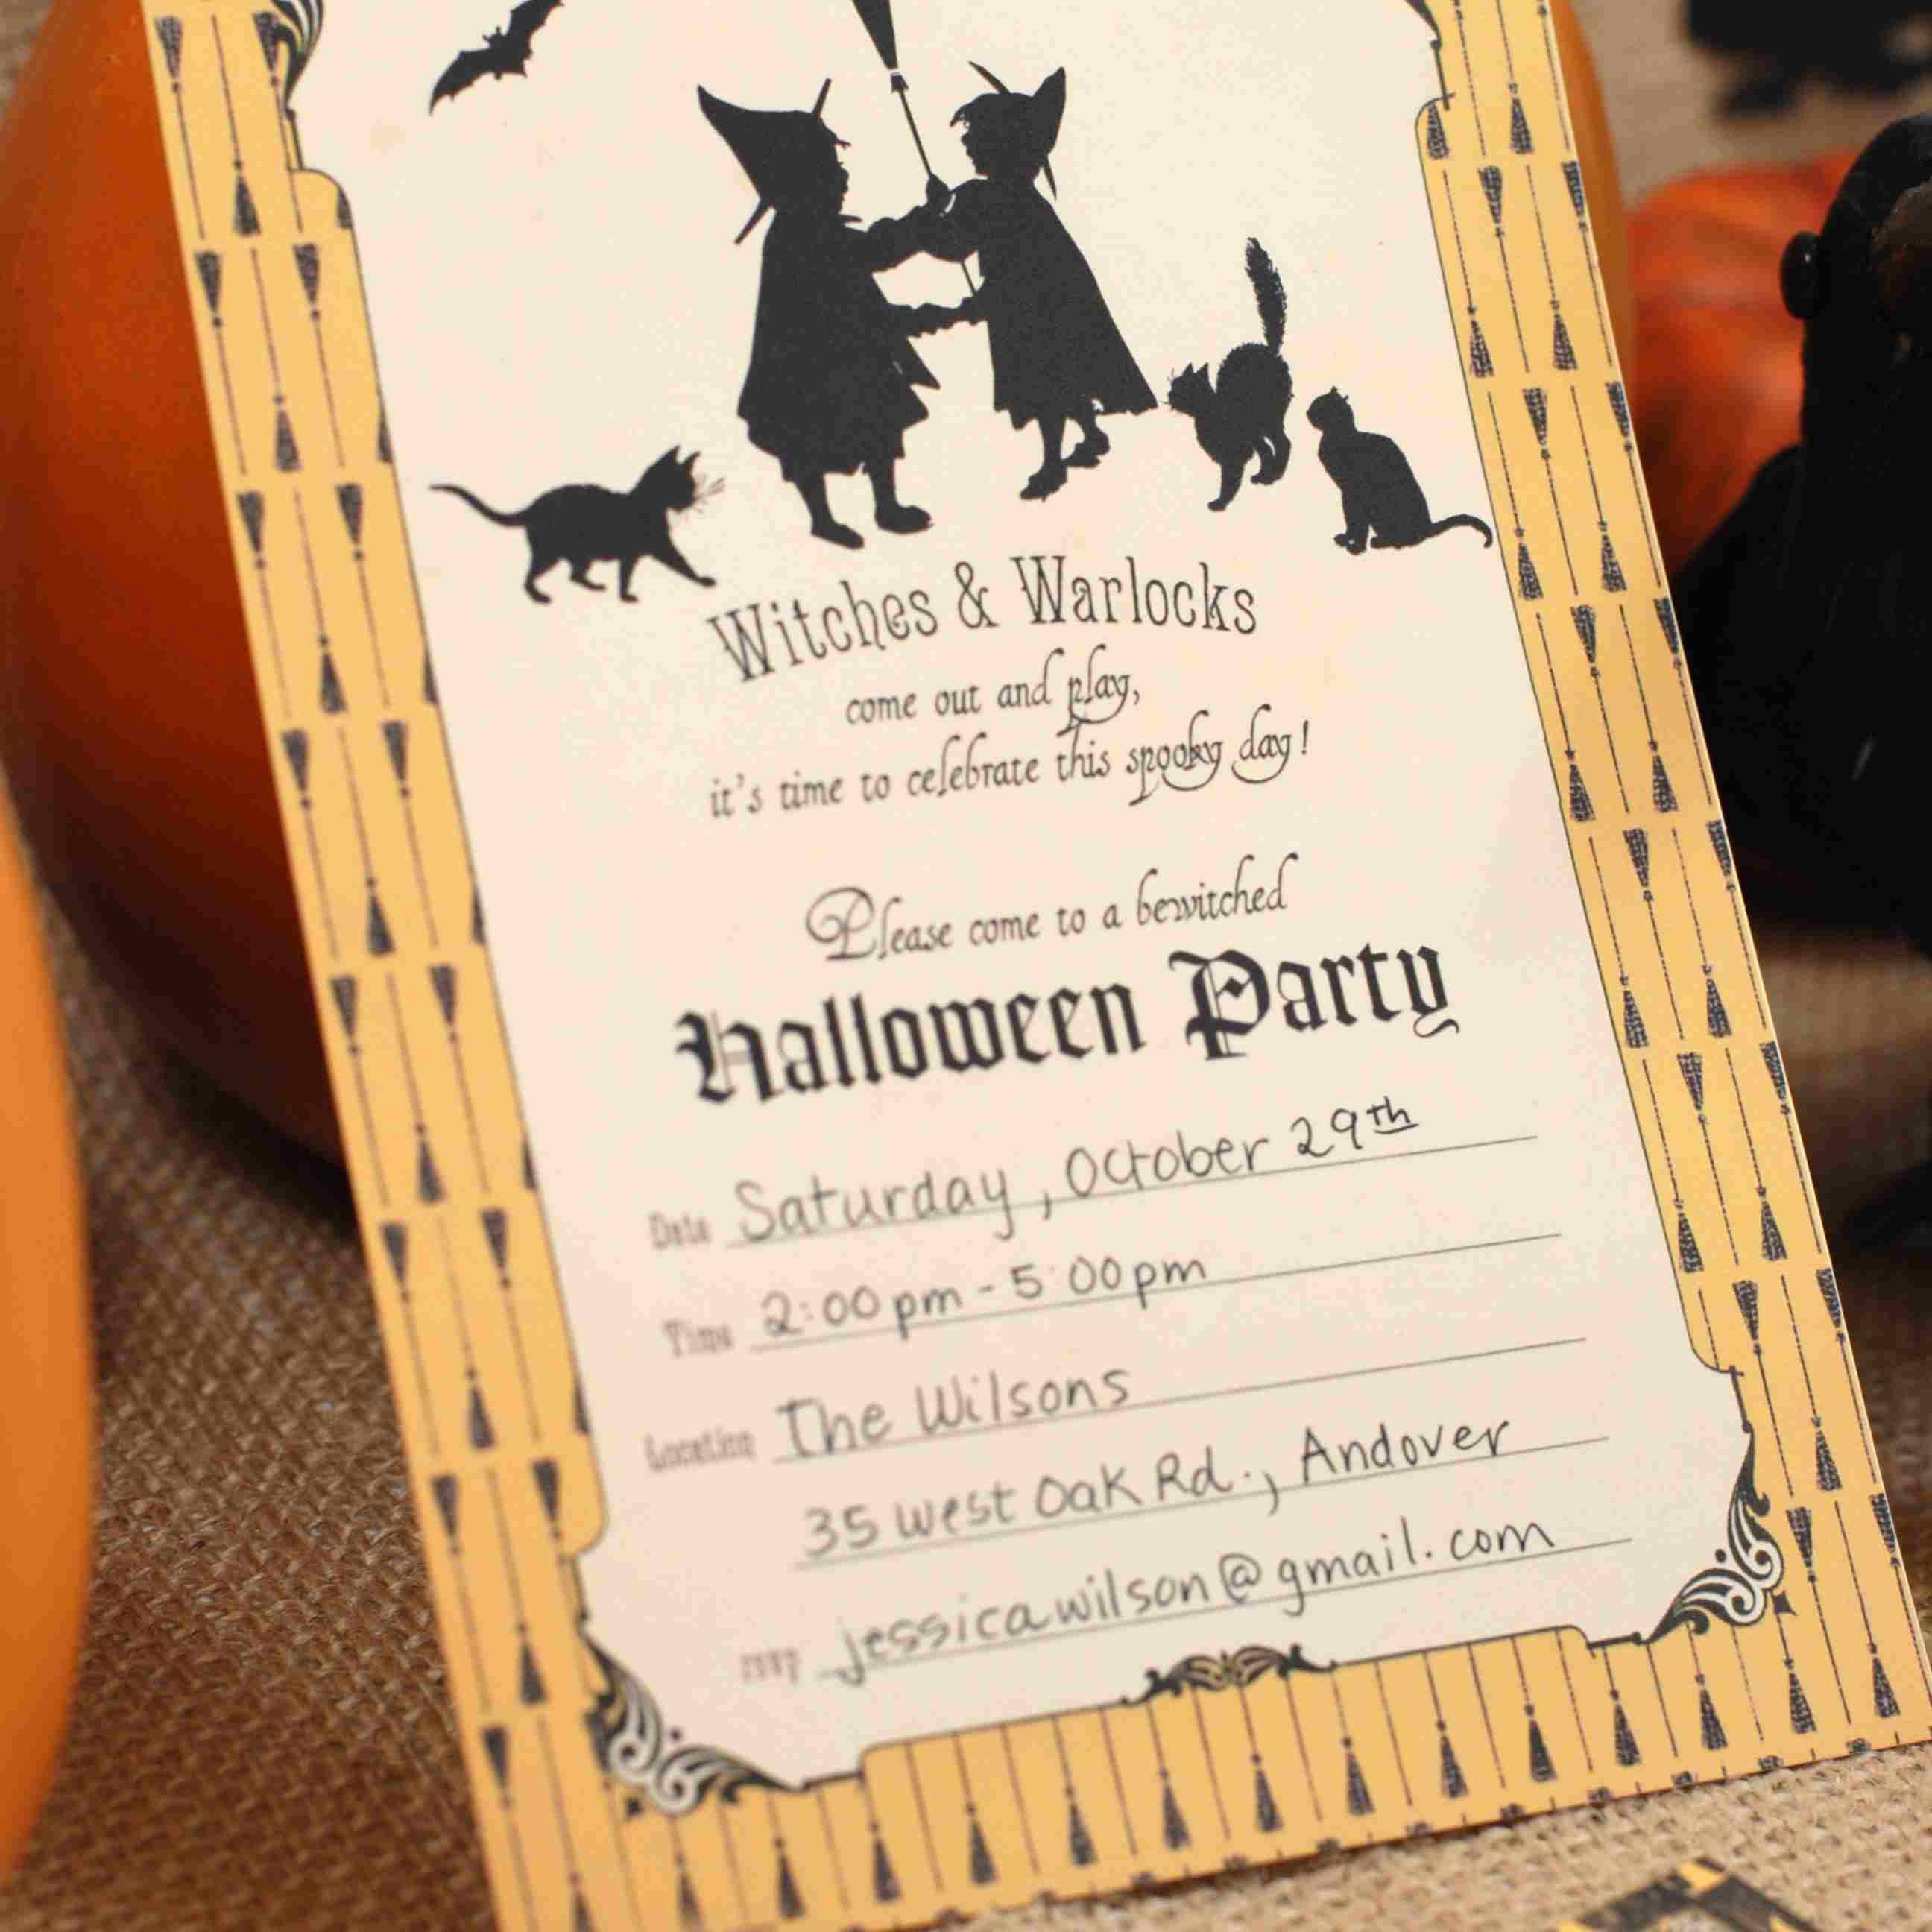 17 Free Halloween Invitations You Can Print From Home - Free Printable Halloween Invitations For Adults